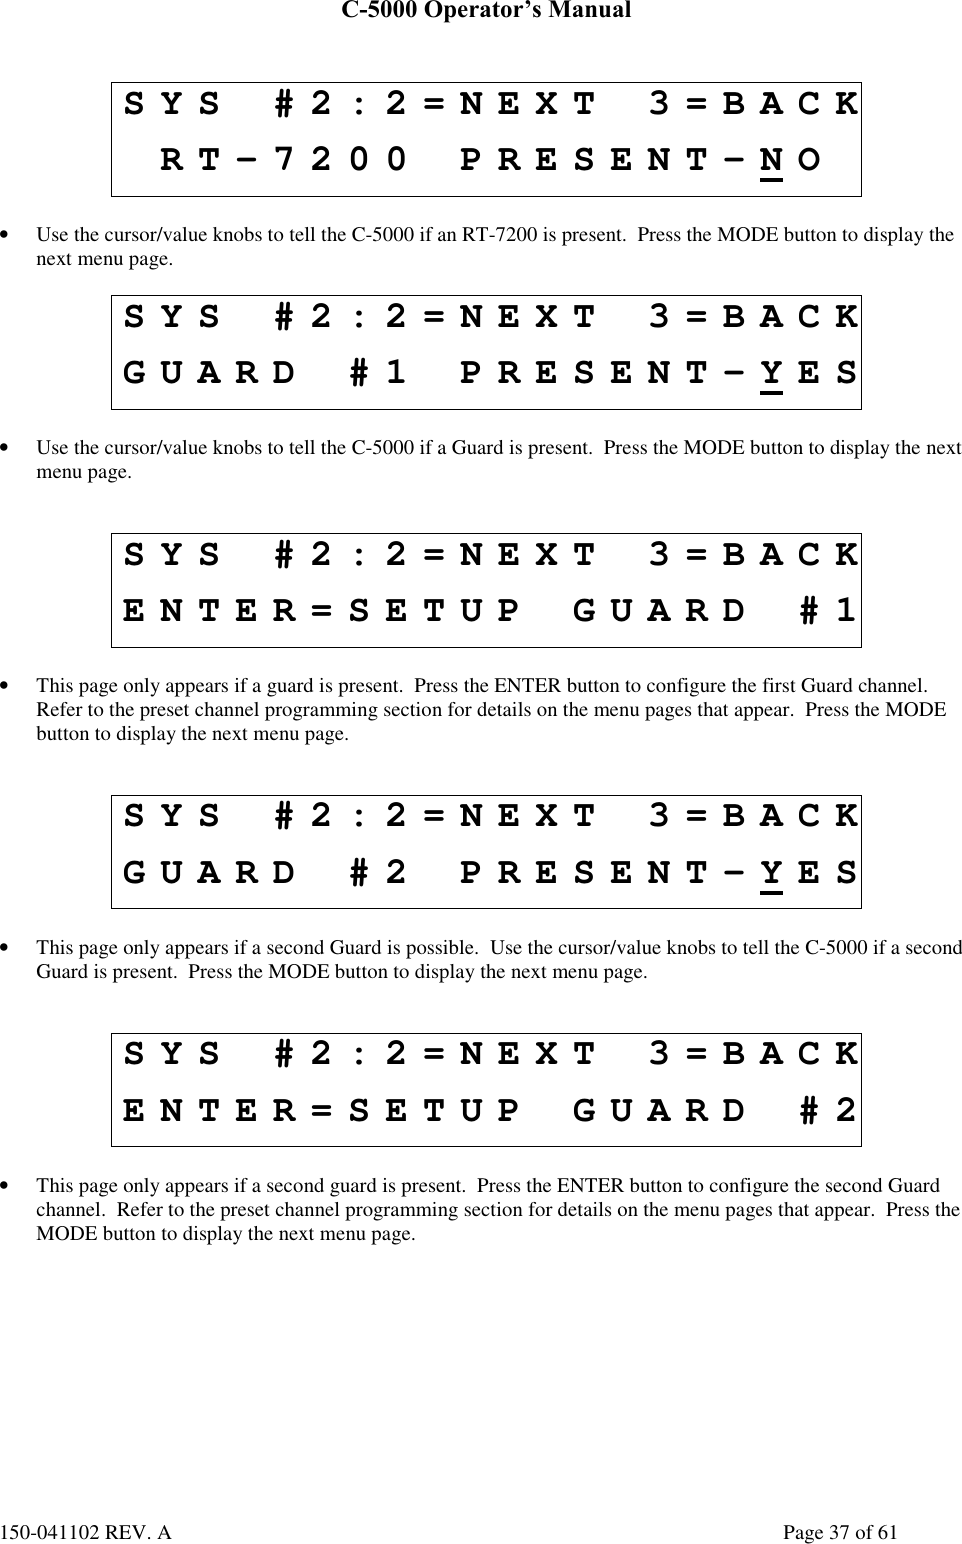 C-5000 Operator’s Manual150-041102 REV. A Page 37 of 61SYS #2:2=NEXT 3=BACKRT-7200 PRESENT-NO• Use the cursor/value knobs to tell the C-5000 if an RT-7200 is present.  Press the MODE button to display thenext menu page.SYS #2:2=NEXT 3=BACKGUARD #1 PRESENT-YES• Use the cursor/value knobs to tell the C-5000 if a Guard is present.  Press the MODE button to display the nextmenu page.SYS #2:2=NEXT 3=BACKENTER=SETUP GUARD #1• This page only appears if a guard is present.  Press the ENTER button to configure the first Guard channel.Refer to the preset channel programming section for details on the menu pages that appear.  Press the MODEbutton to display the next menu page.SYS #2:2=NEXT 3=BACKGUARD #2 PRESENT-YES• This page only appears if a second Guard is possible.  Use the cursor/value knobs to tell the C-5000 if a secondGuard is present.  Press the MODE button to display the next menu page.SYS #2:2=NEXT 3=BACKENTER=SETUP GUARD #2• This page only appears if a second guard is present.  Press the ENTER button to configure the second Guardchannel.  Refer to the preset channel programming section for details on the menu pages that appear.  Press theMODE button to display the next menu page.